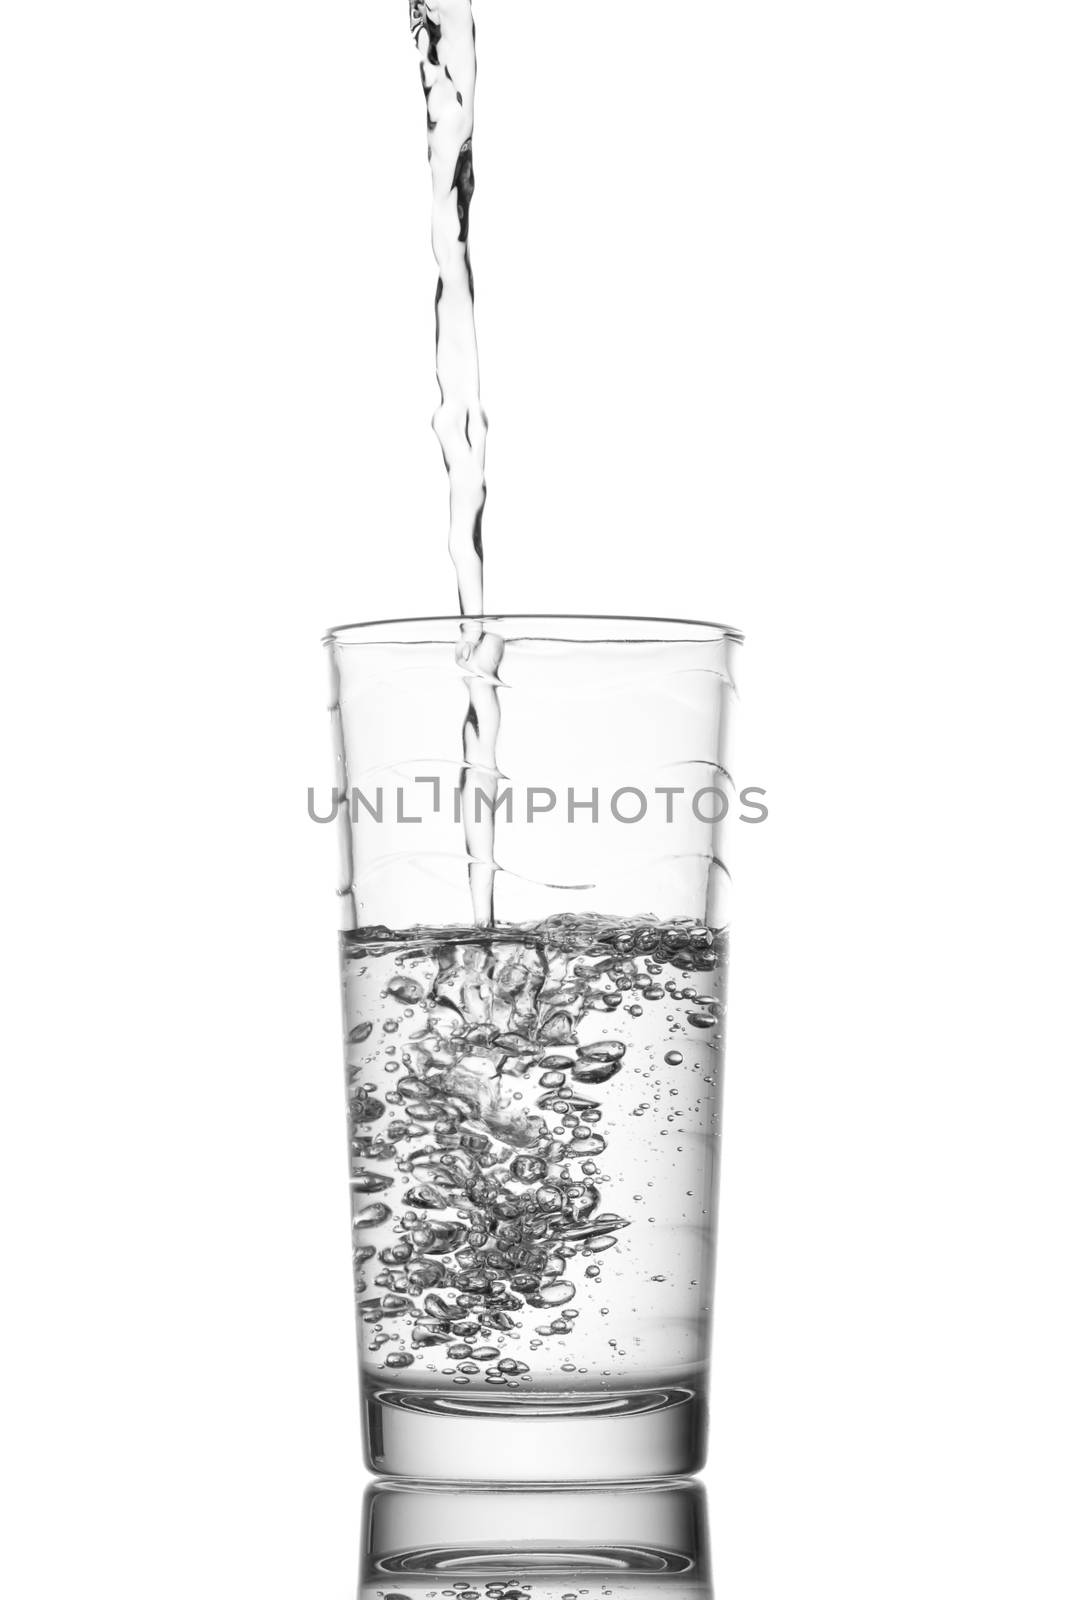 Glass of water by furo_felix